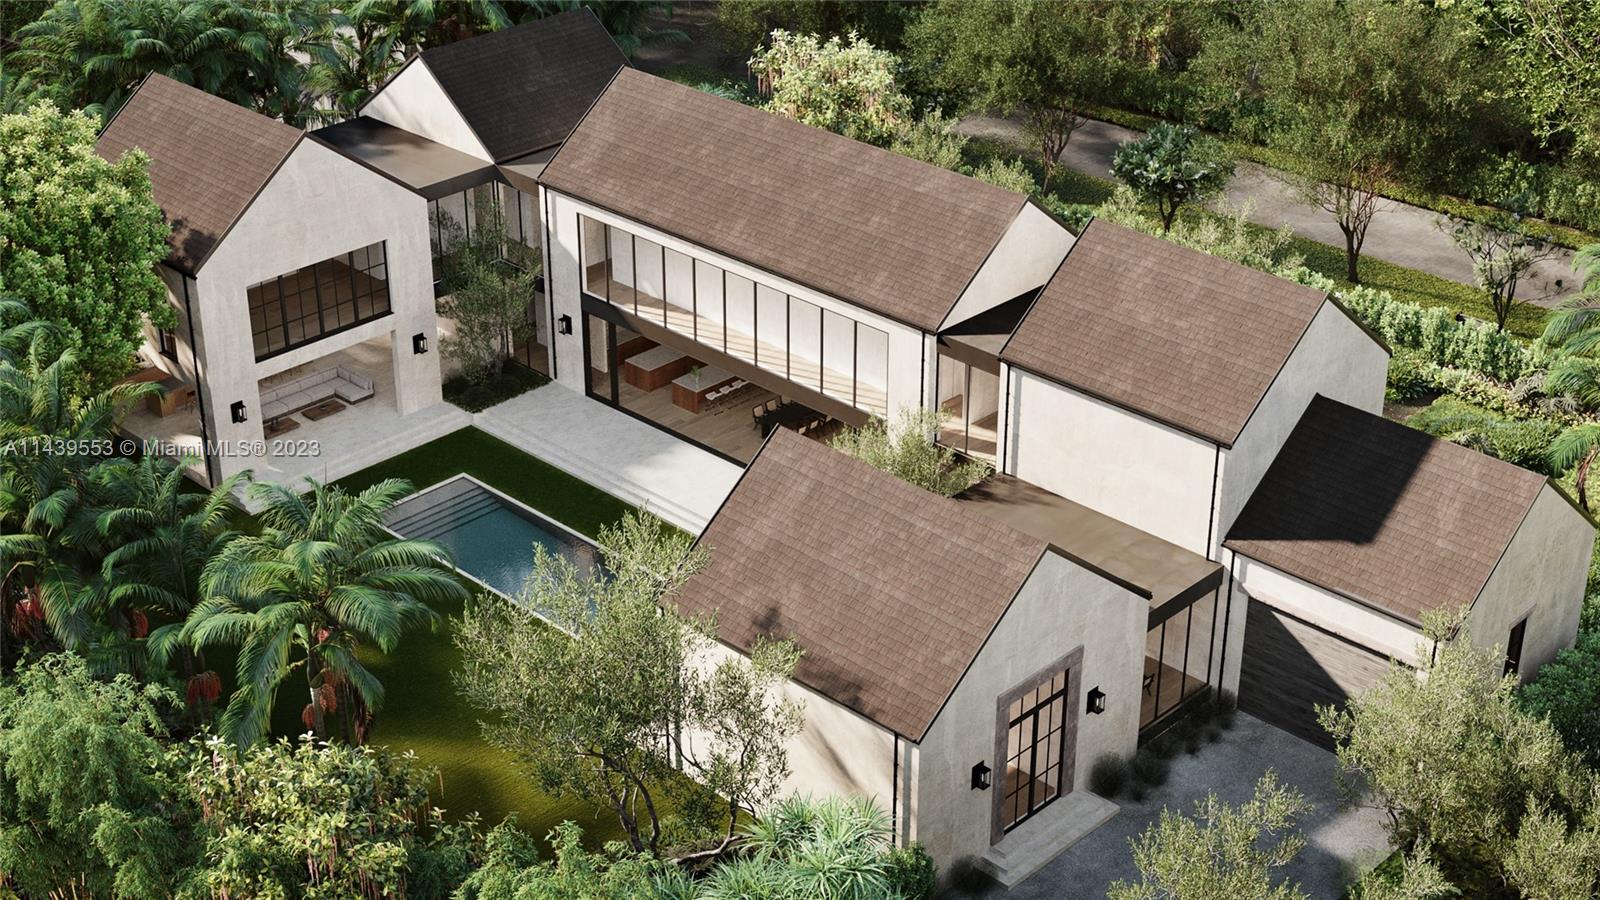 Exquisite Coral Gables residence underway.Built by MOCCA, this innovative & contemporary home sets a new standard for a fresh & modern take on farmhouse design.Integrating a seamless indoor/outdoor living experience,accentuating floor to ceiling glass, natural wood elements & stone features to blend the immaculate architecture & expressive details.Over 9,300SF this home includes 6bd/6ba/2hb w/clean lines & custom finishes.Featuring a chefs kitchen w/a neutral palette, expansive liv. spaces, & stunning primary suite; all overlooking the manicured gardens & inviting exterior areas.This refined retreat highlights private & serene lounging, summer kitchen, picturesque pool &more.Uniquely designed,this home encompasses luxury living w/flawless craftsmanship & unparalleled attention to detail.